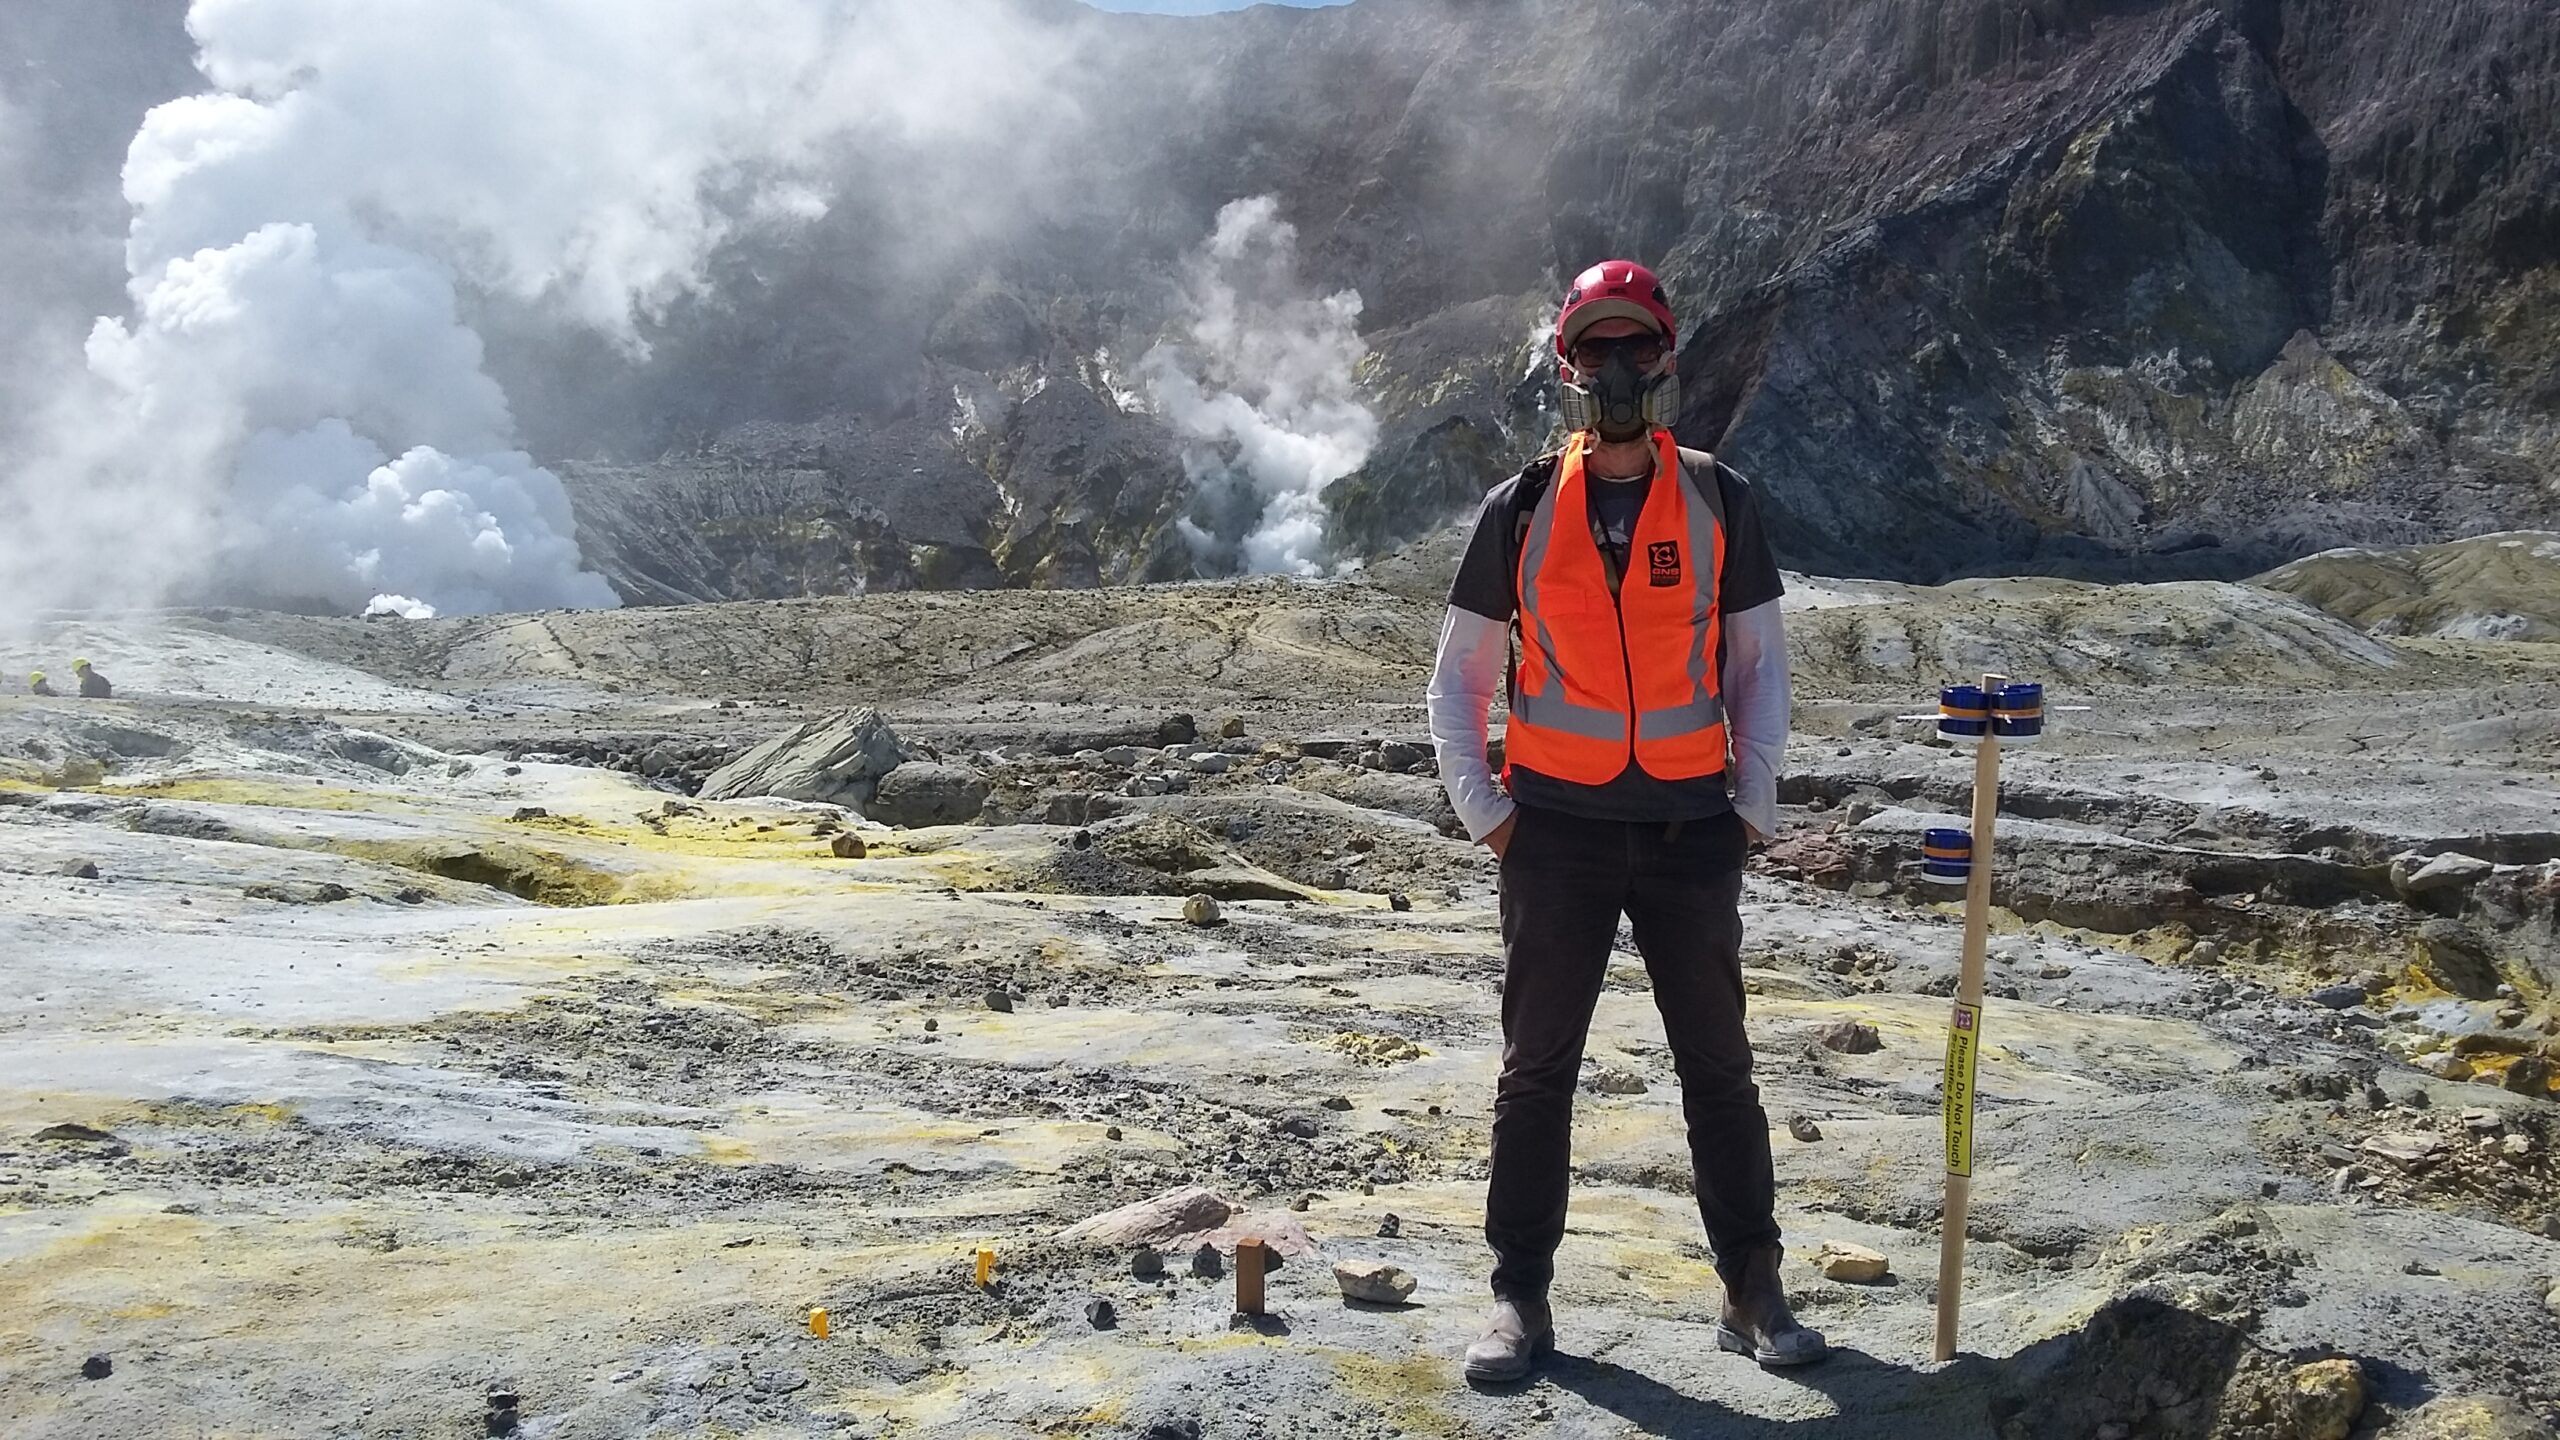 man at volcano site with protective gear